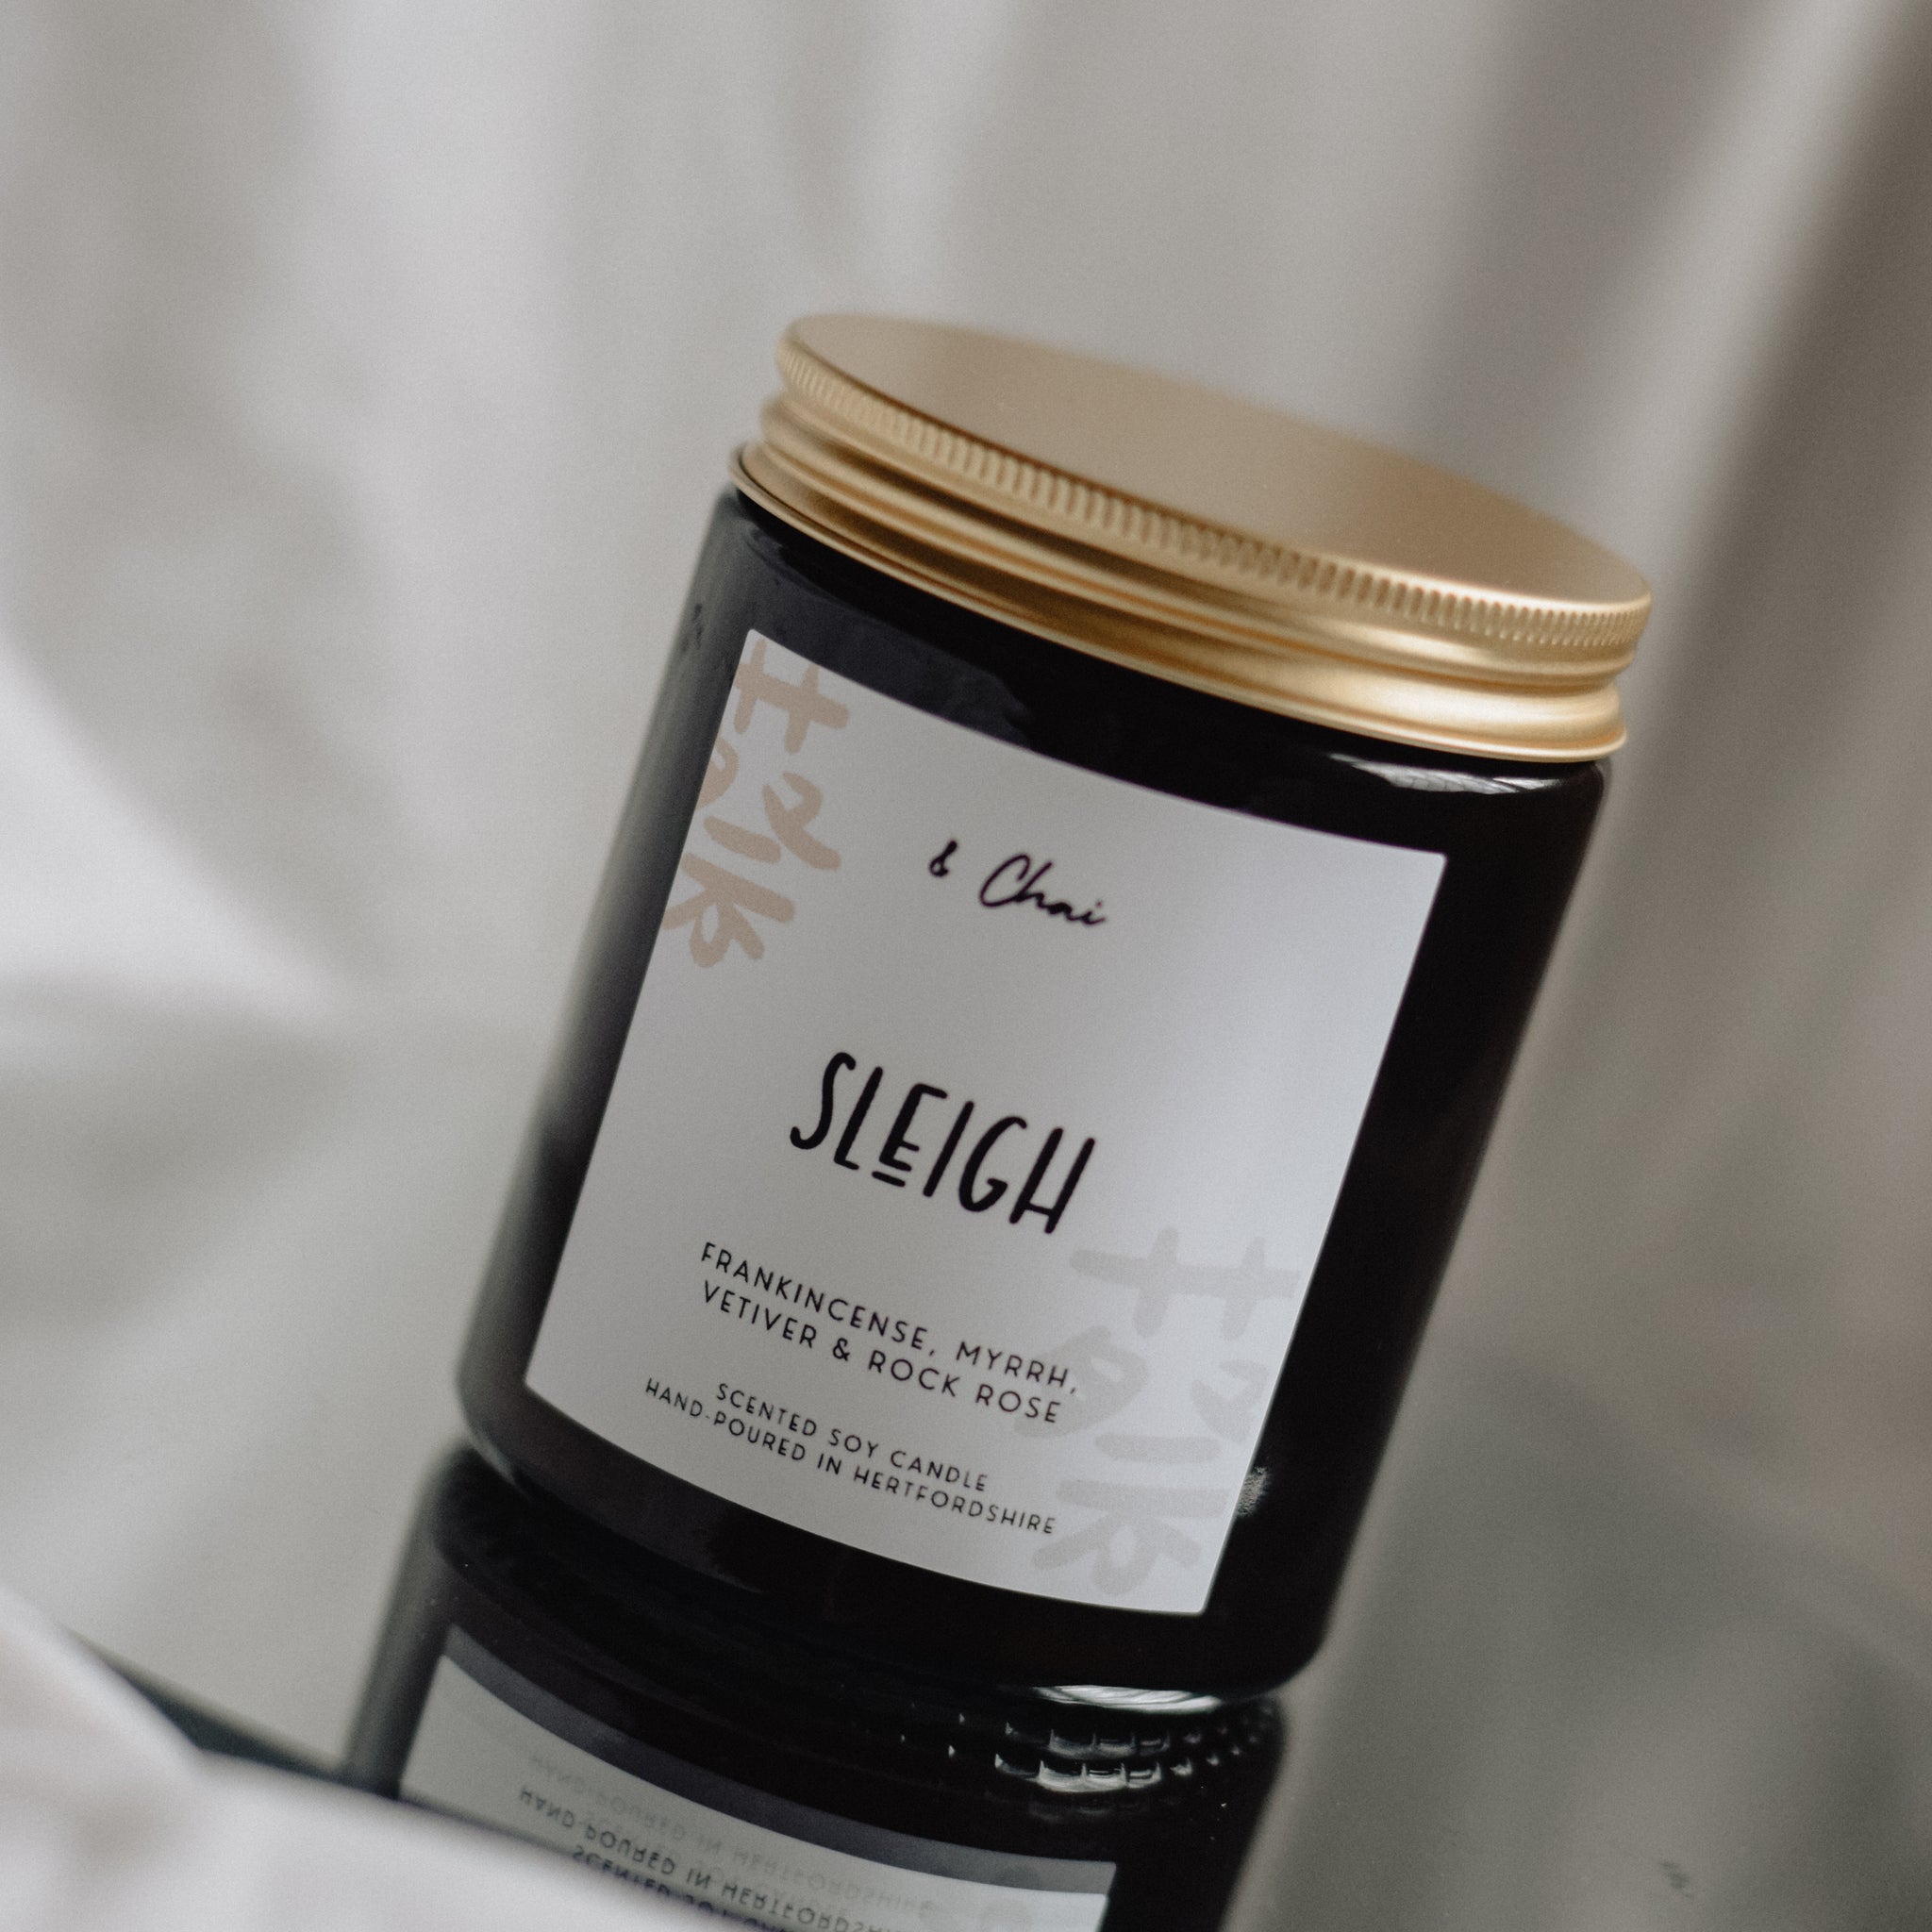 Sleigh Soy Candle